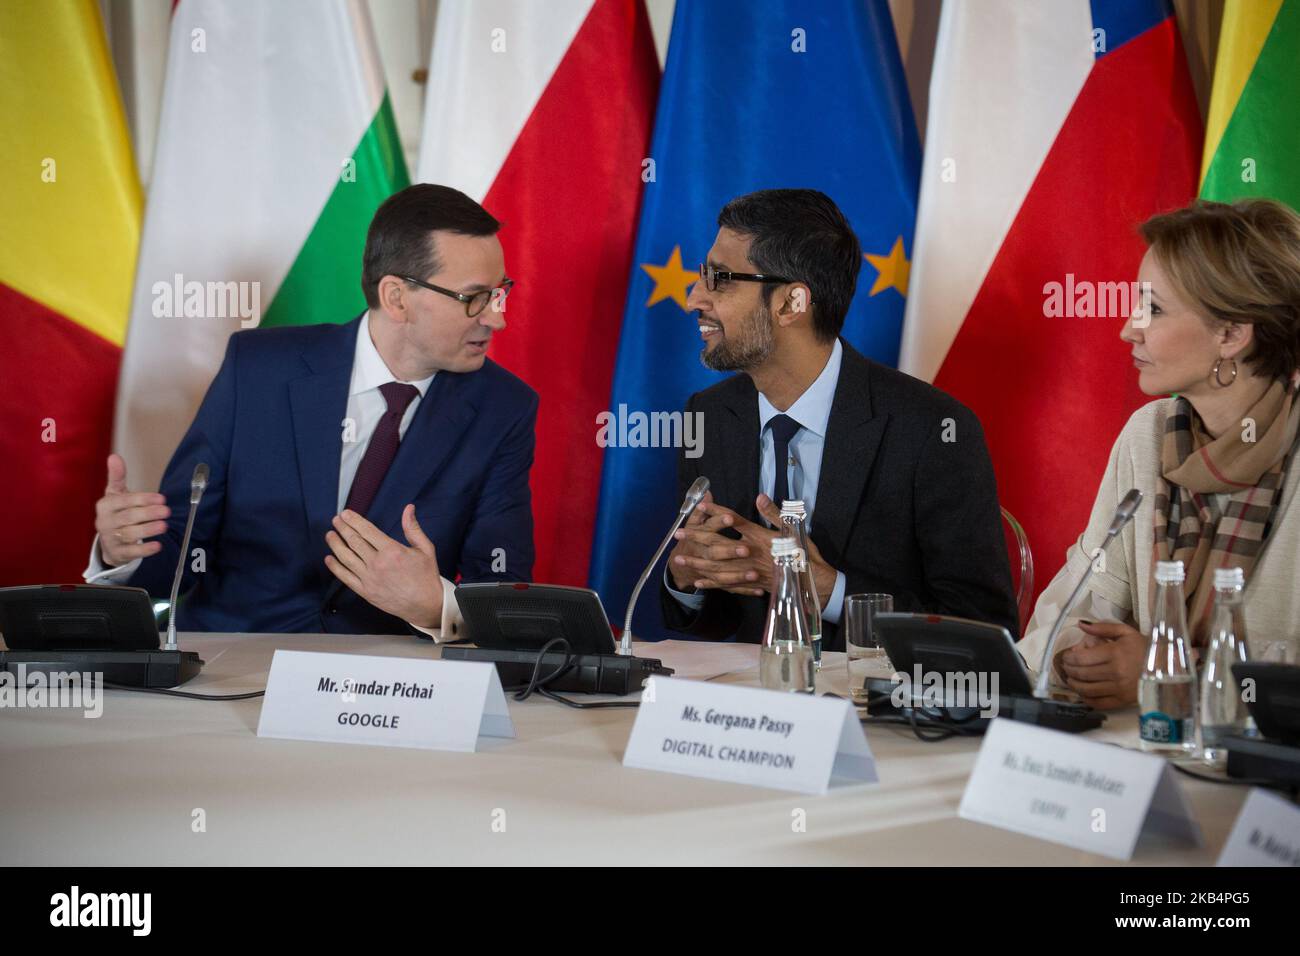 Prime Minister of Poland Mateusz Morawiecki (L) and Google CEO Sundar Pichai (R) during the 'Central and Eastern Europe Innovation Roundtable' at Lazienki Palace in Warsaw, Poland on 21 January 2019 (Photo by Mateusz Wlodarczyk/NurPhoto) Stock Photo